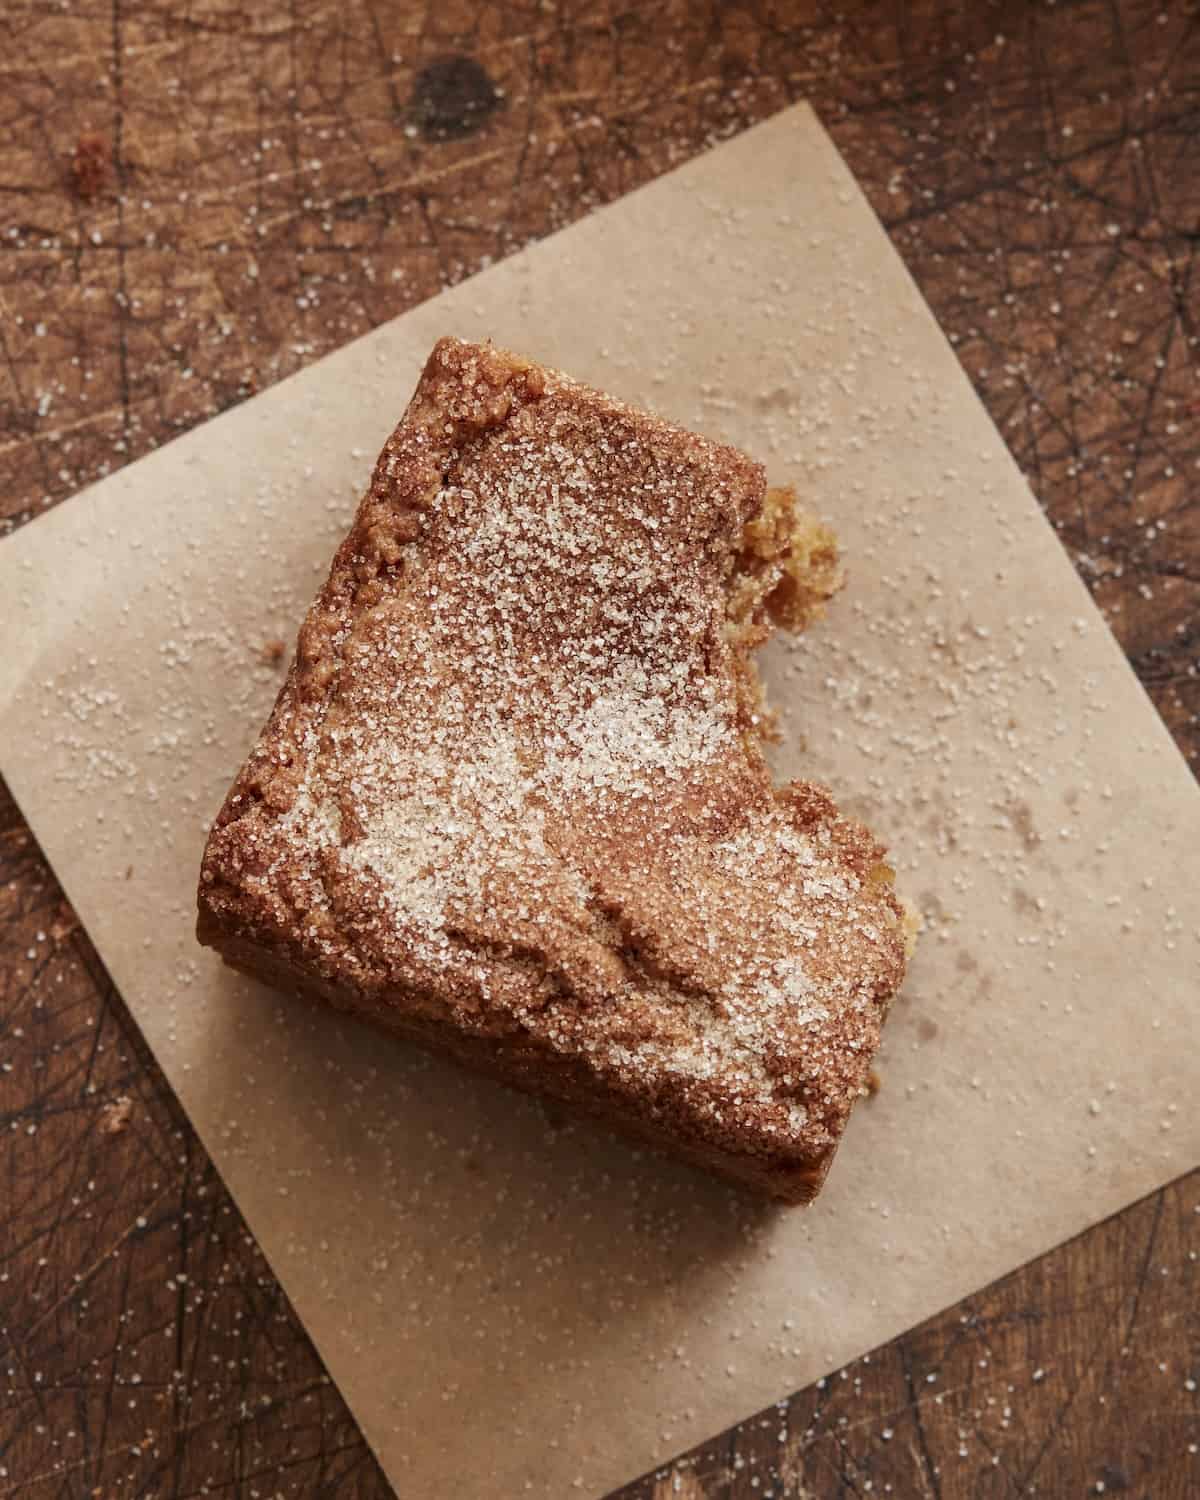 A blondie square placed on a piece of parchment paper, sprinkled with cinnamon sugar and a bite eaten off from the corner, placed on a wooden board.